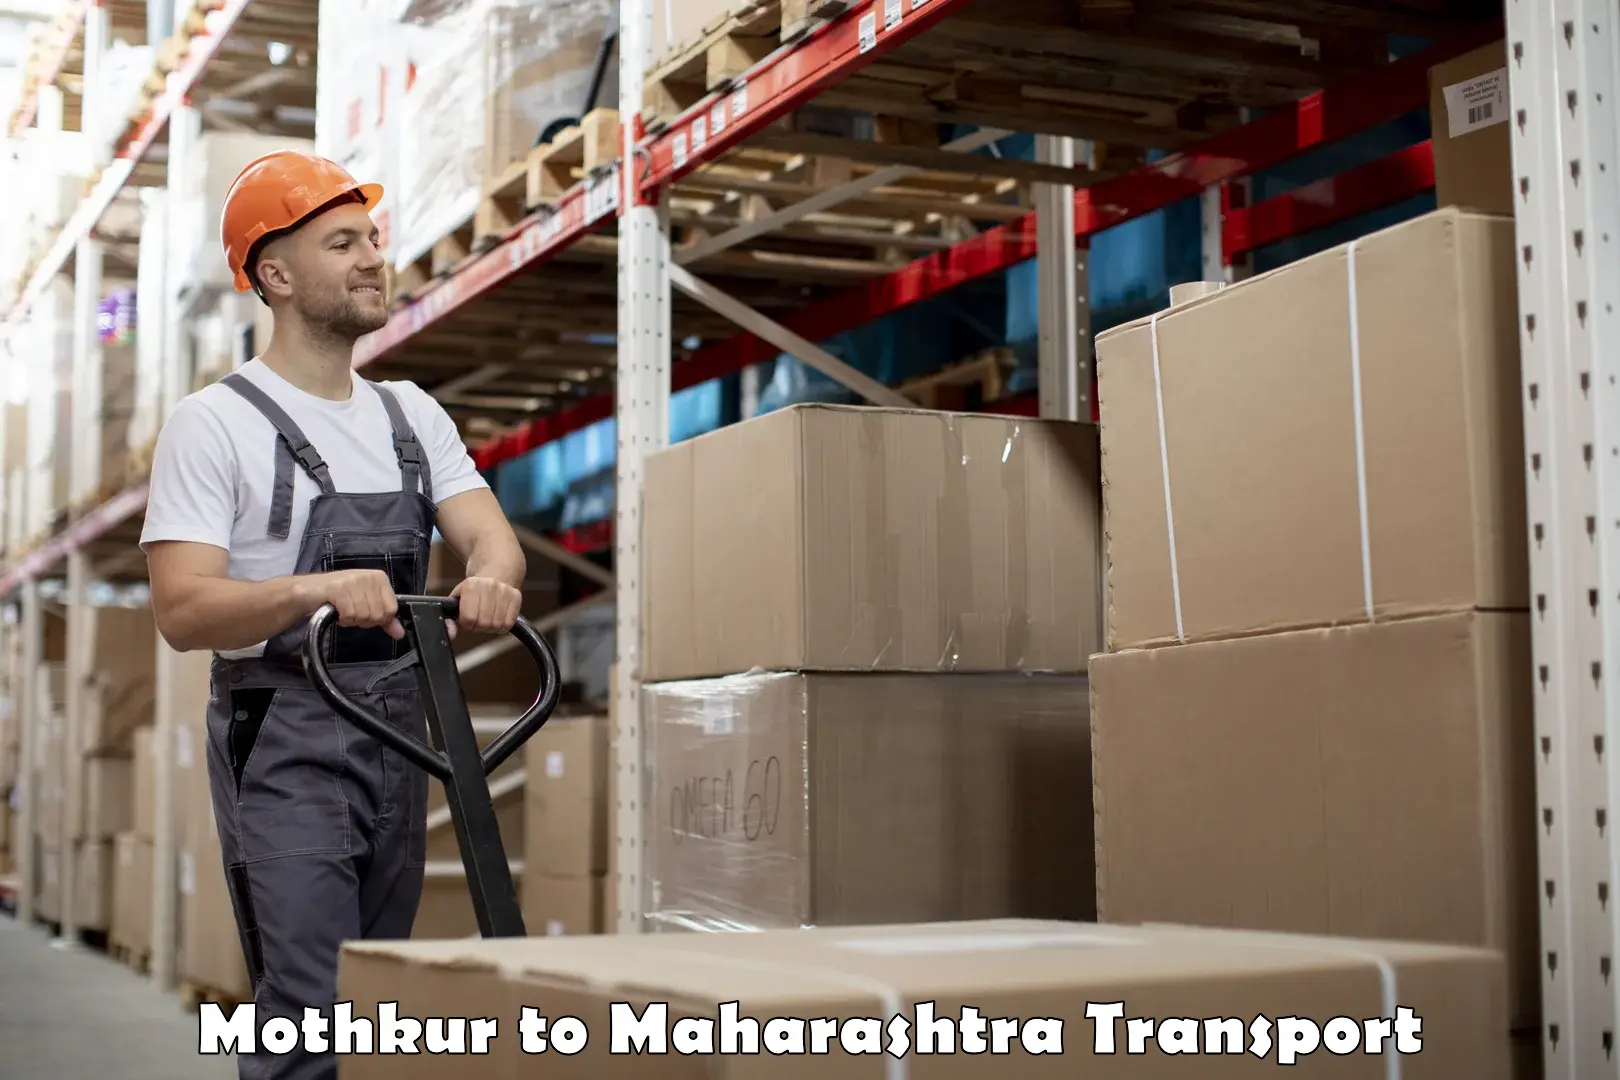 Container transport service Mothkur to Supe